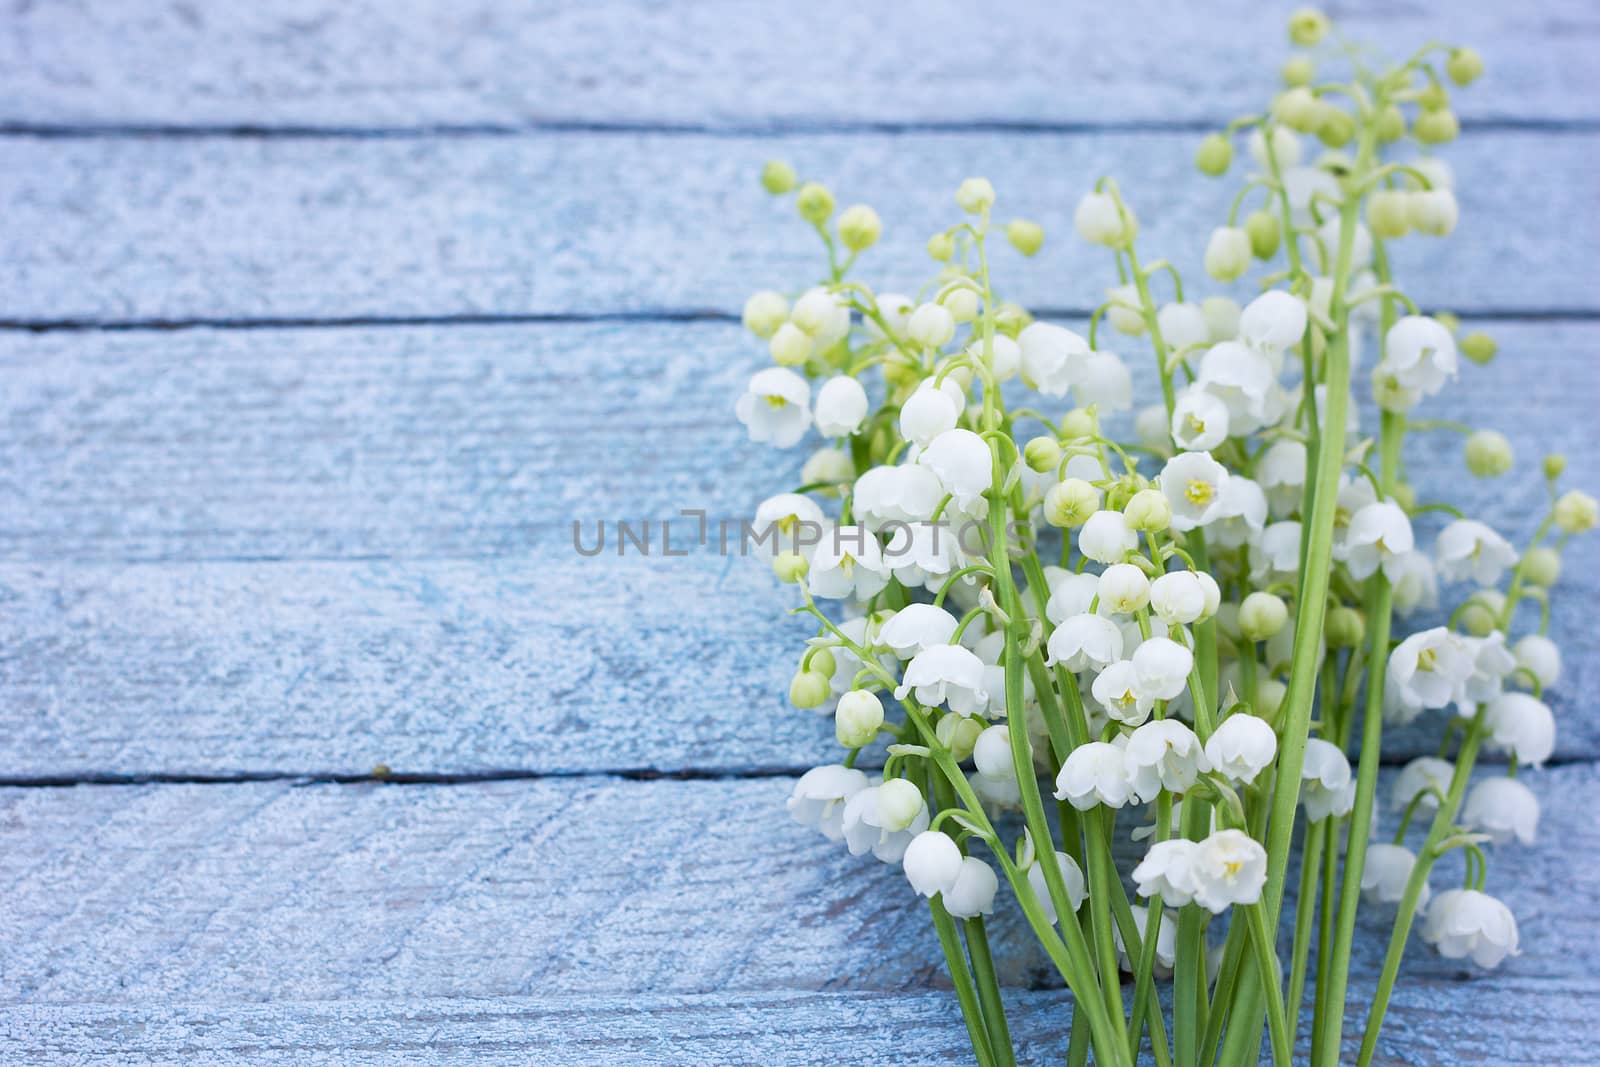 A bouquet of lily of the valley on a wooden background. Spring flowers on a blue wooden background with a place under the inscription